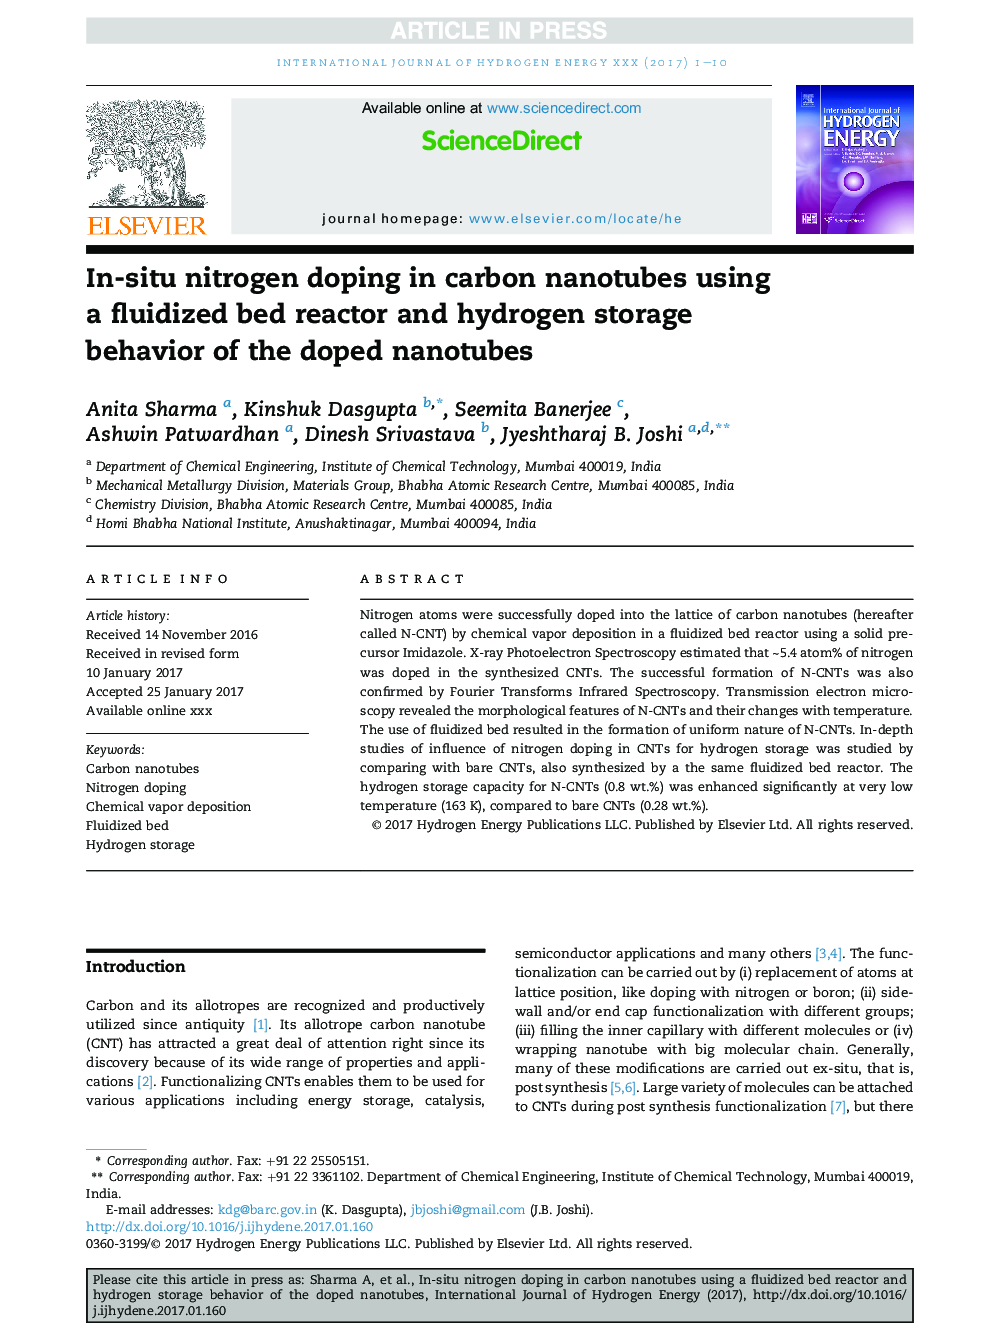 In-situ nitrogen doping in carbon nanotubes using a fluidized bed reactor and hydrogen storage behavior of the doped nanotubes